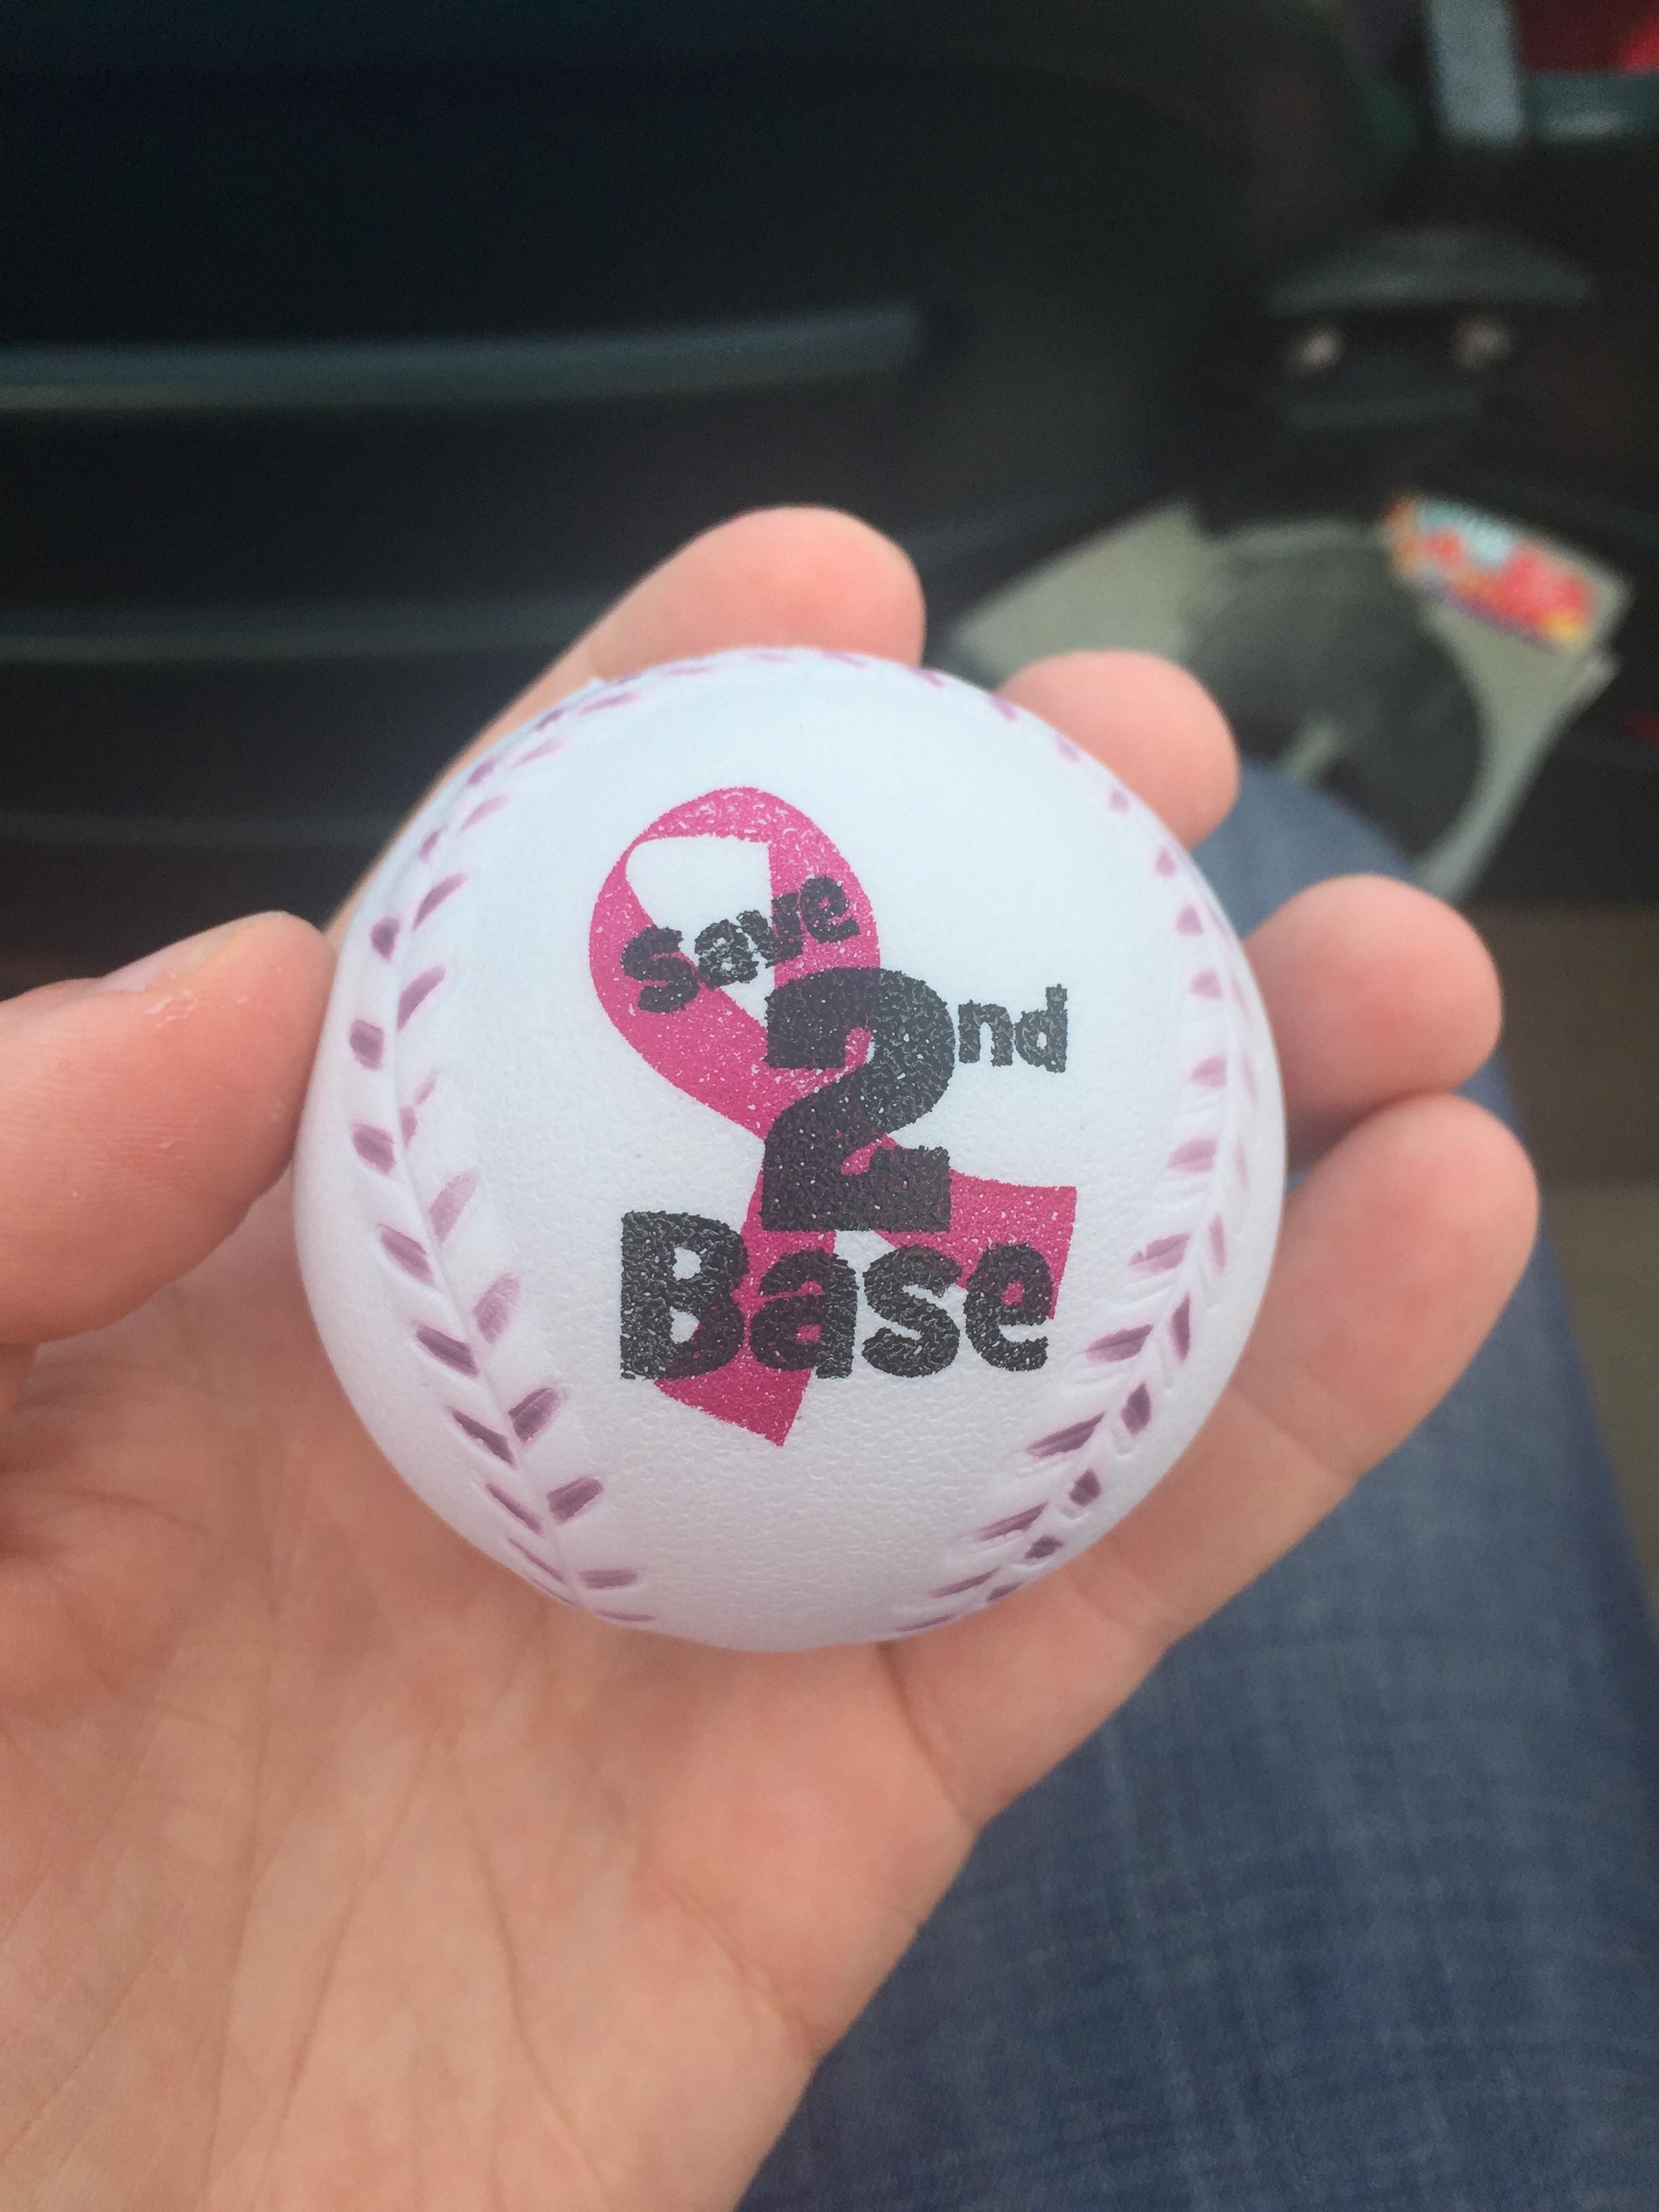 My local baseball stadium was handing these out at last nights game